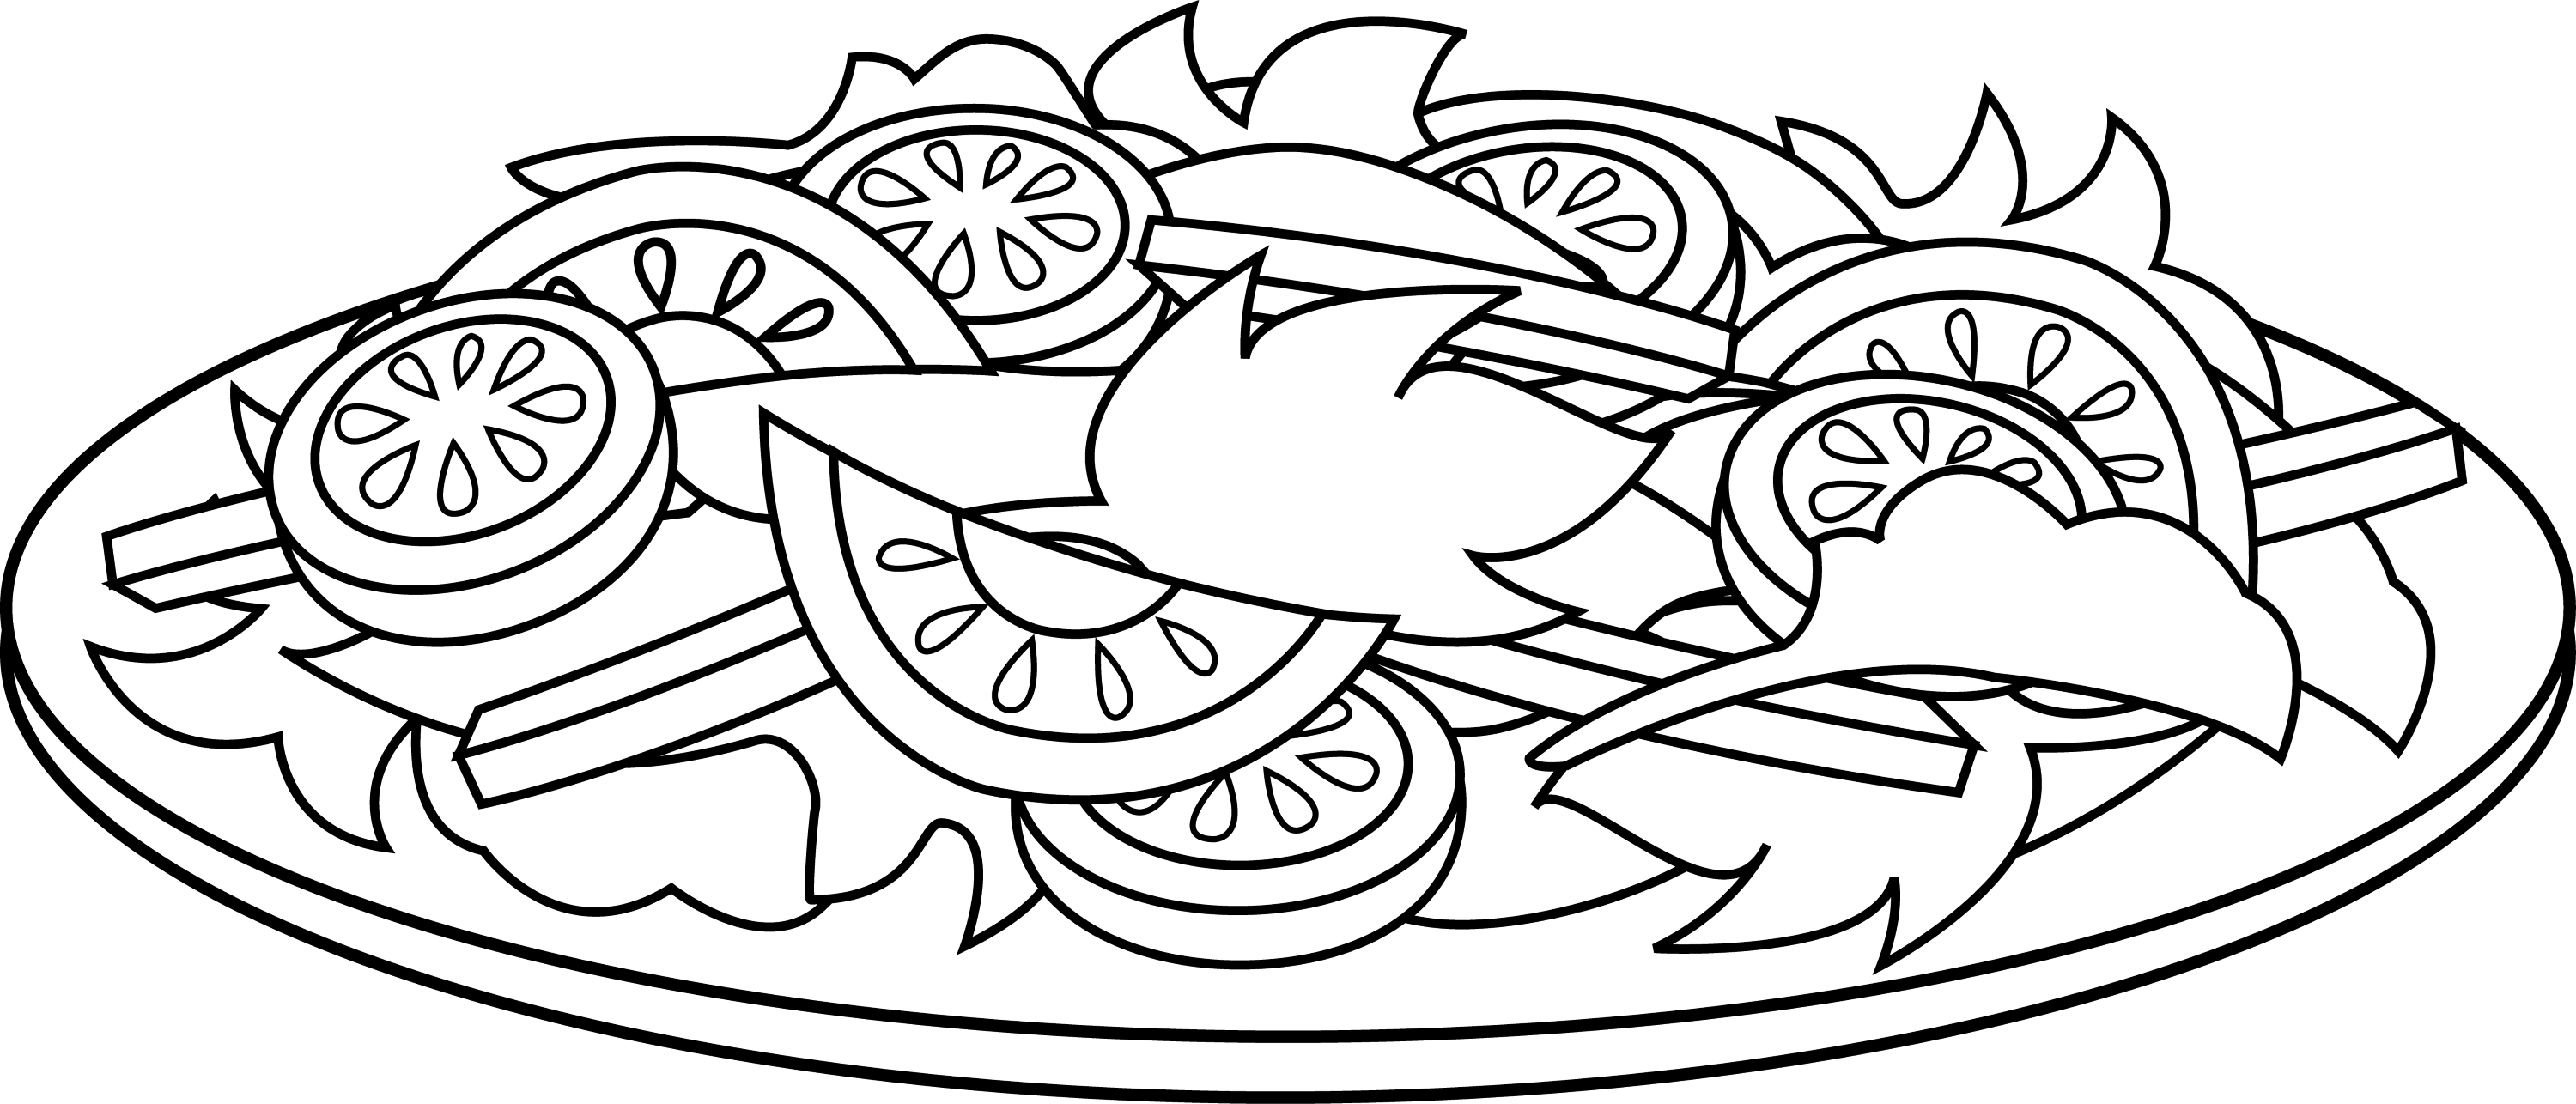 cut and color salad page Colouring Pages